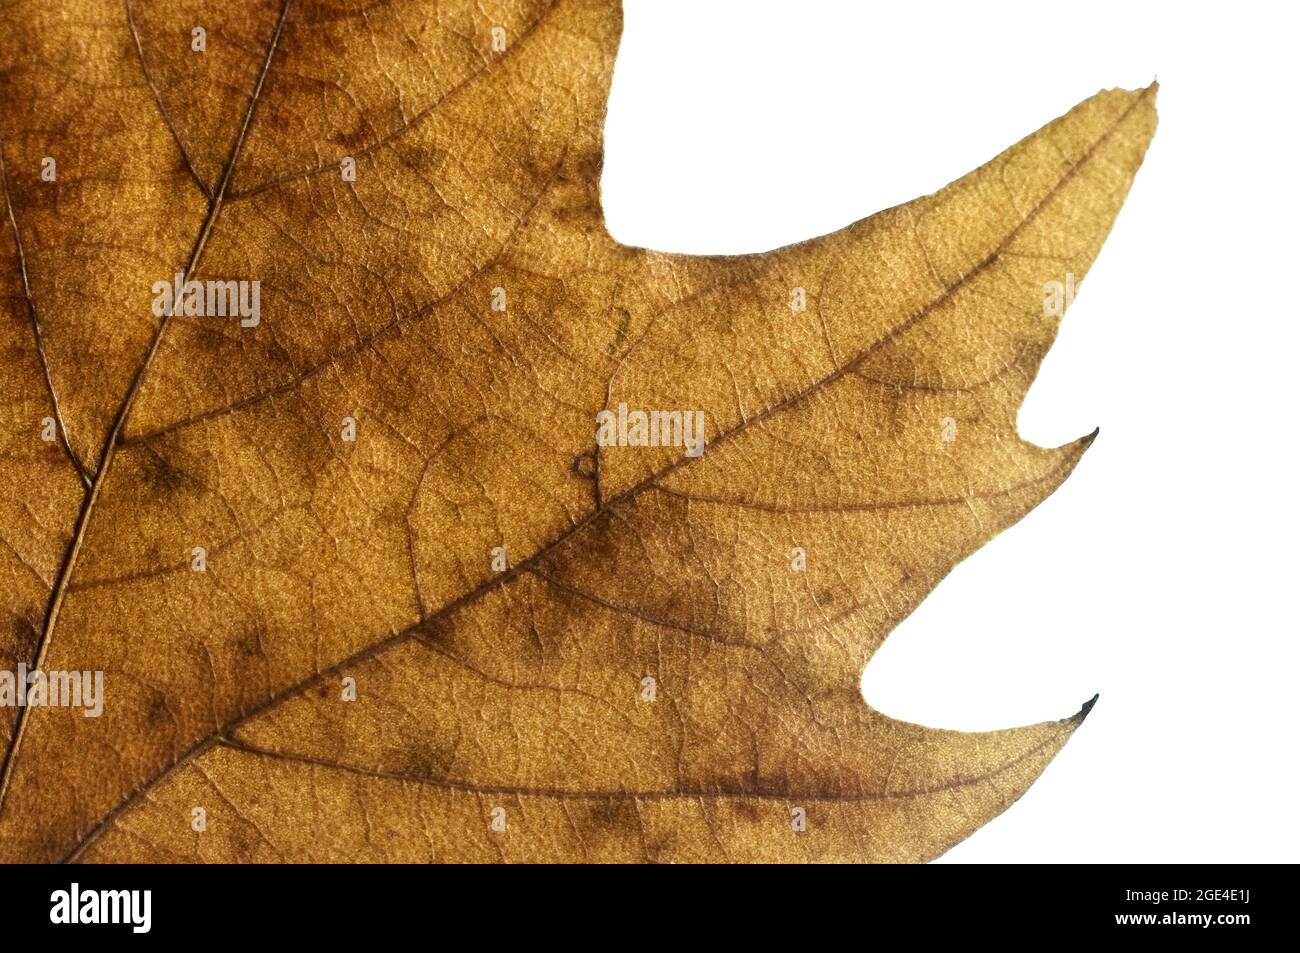 Autumn leaf fallen from a tree with white background. Stock Photo